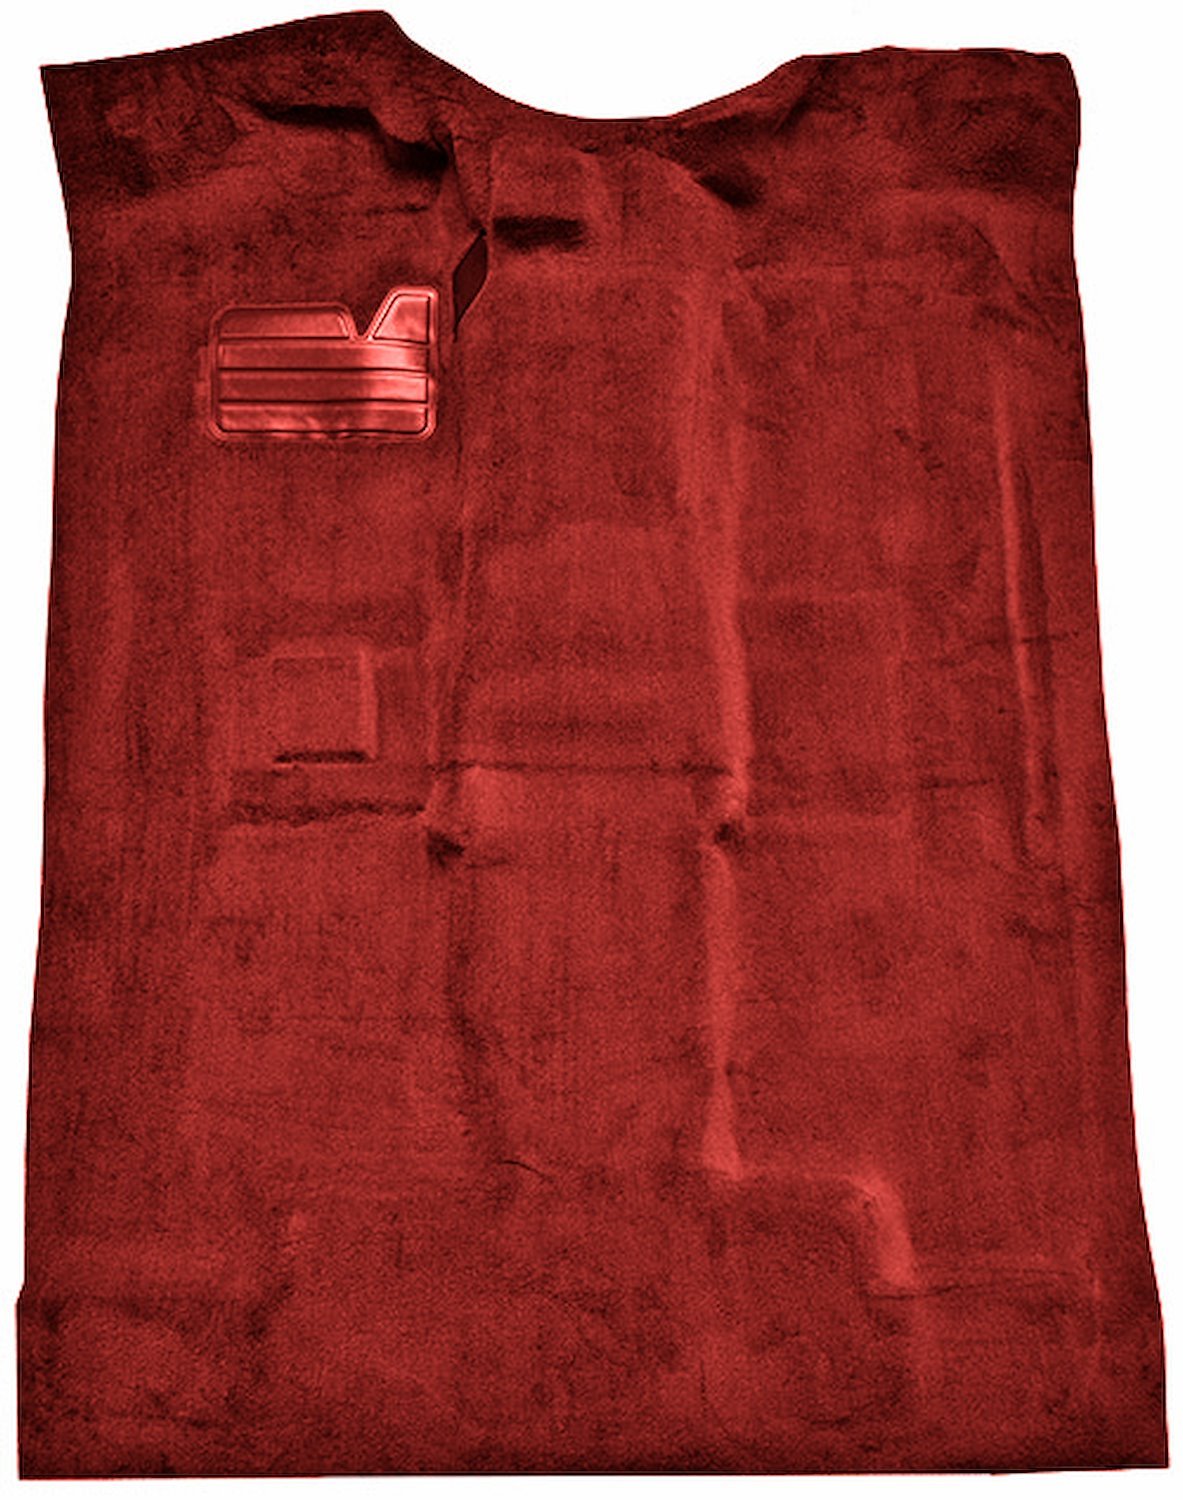 Molded Cut Pile Carpet Fits Select 1997-2002 Chevy/GMC Trucks [Mass Backing, Extended Cab, 1-Piece, Claret/Oxblood]